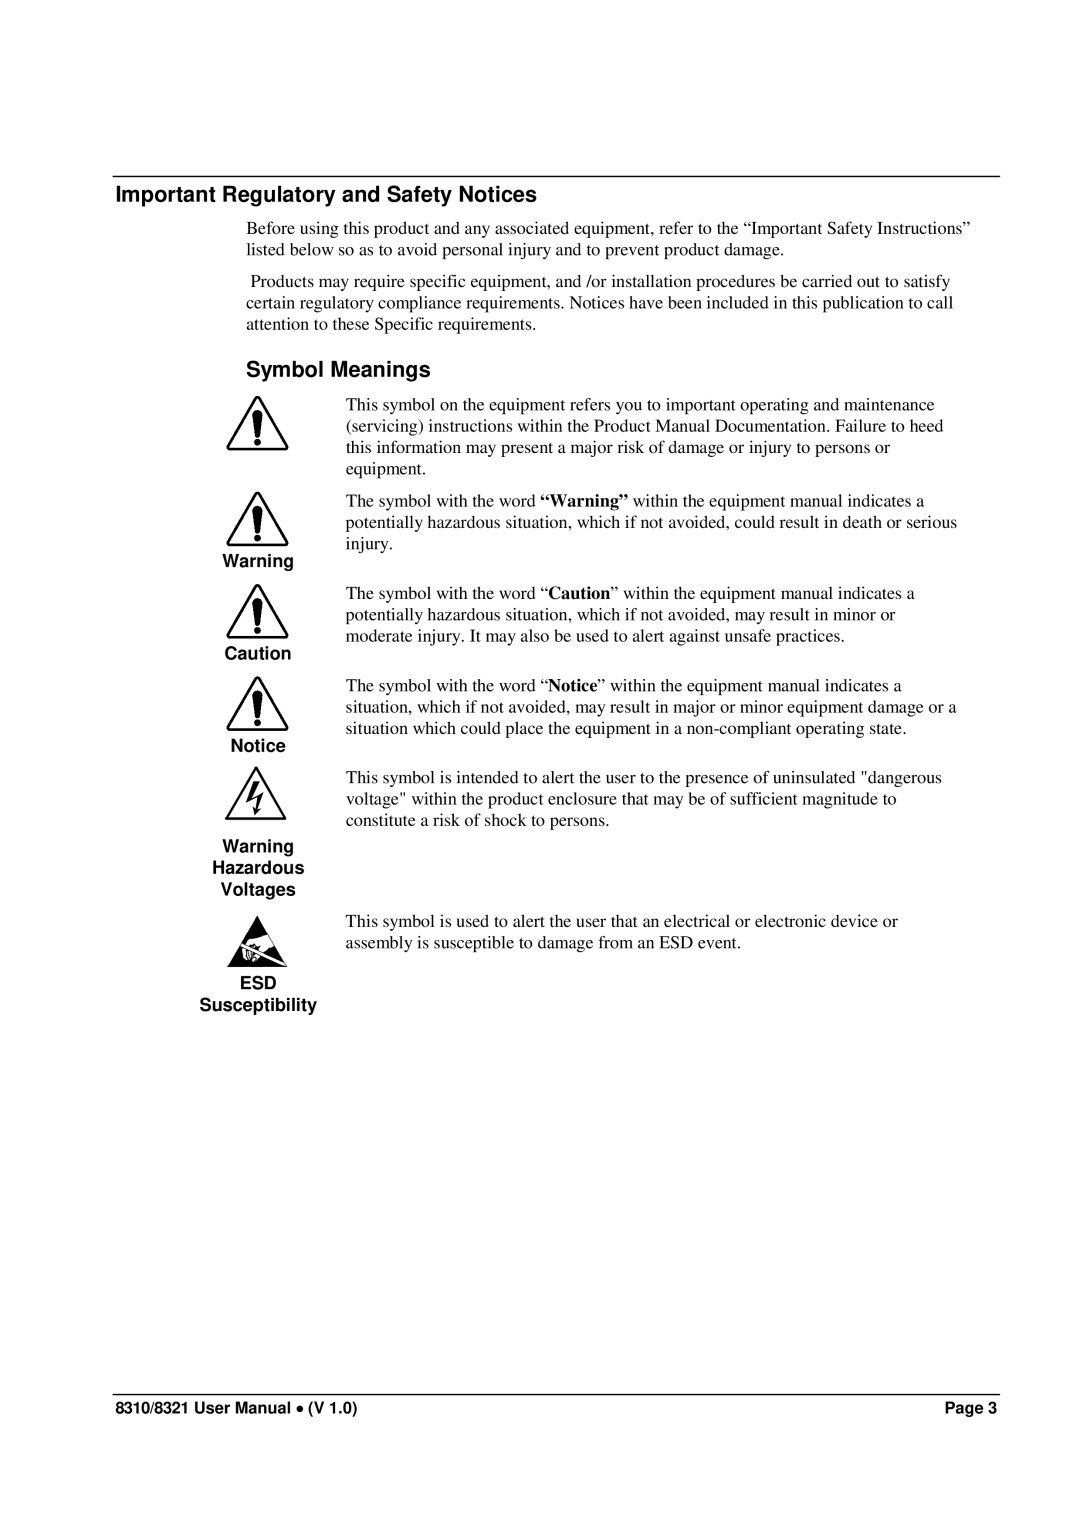 Cobalt Networks 8321(-C), 8310(-C) user manual Important Regulatory and Safety Notices, Symbol Meanings 